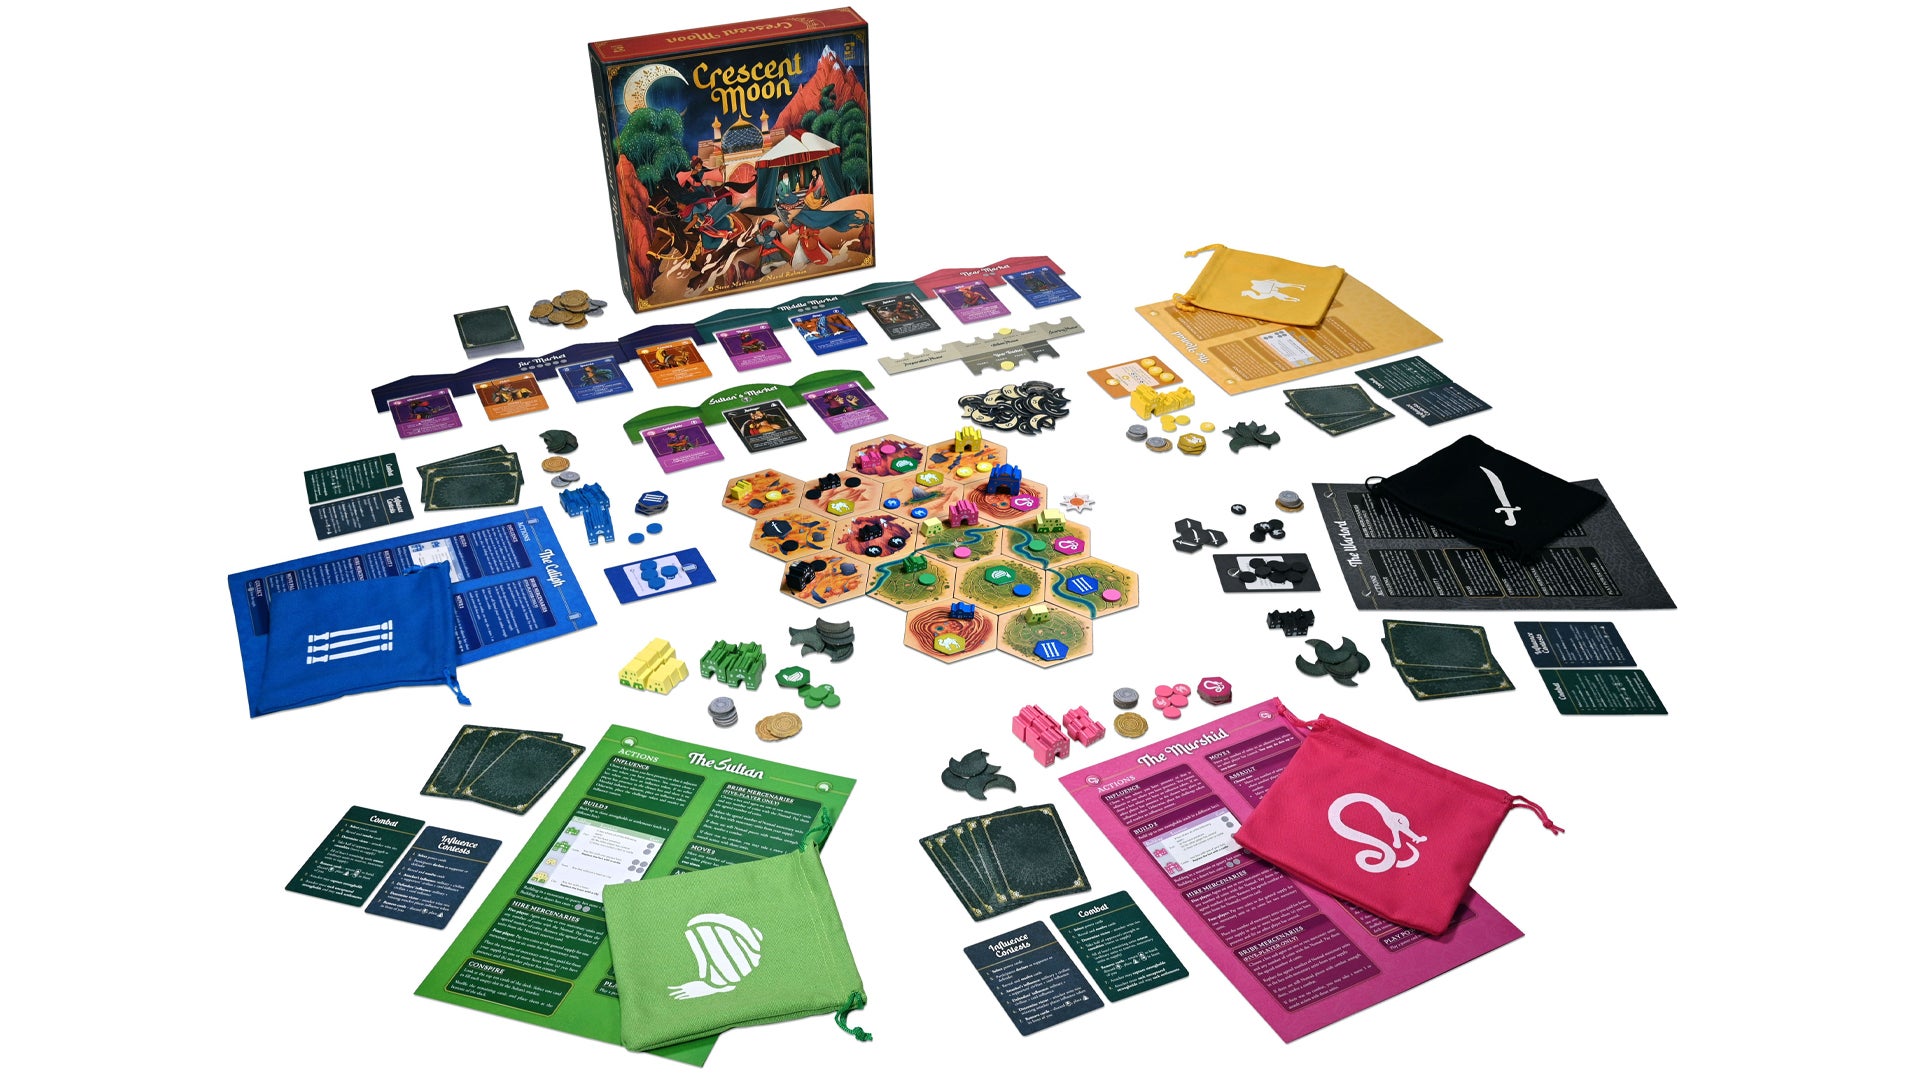 The contents of board game Crescent Moon, including cards, tiles and bags, laid out on a table next to its box